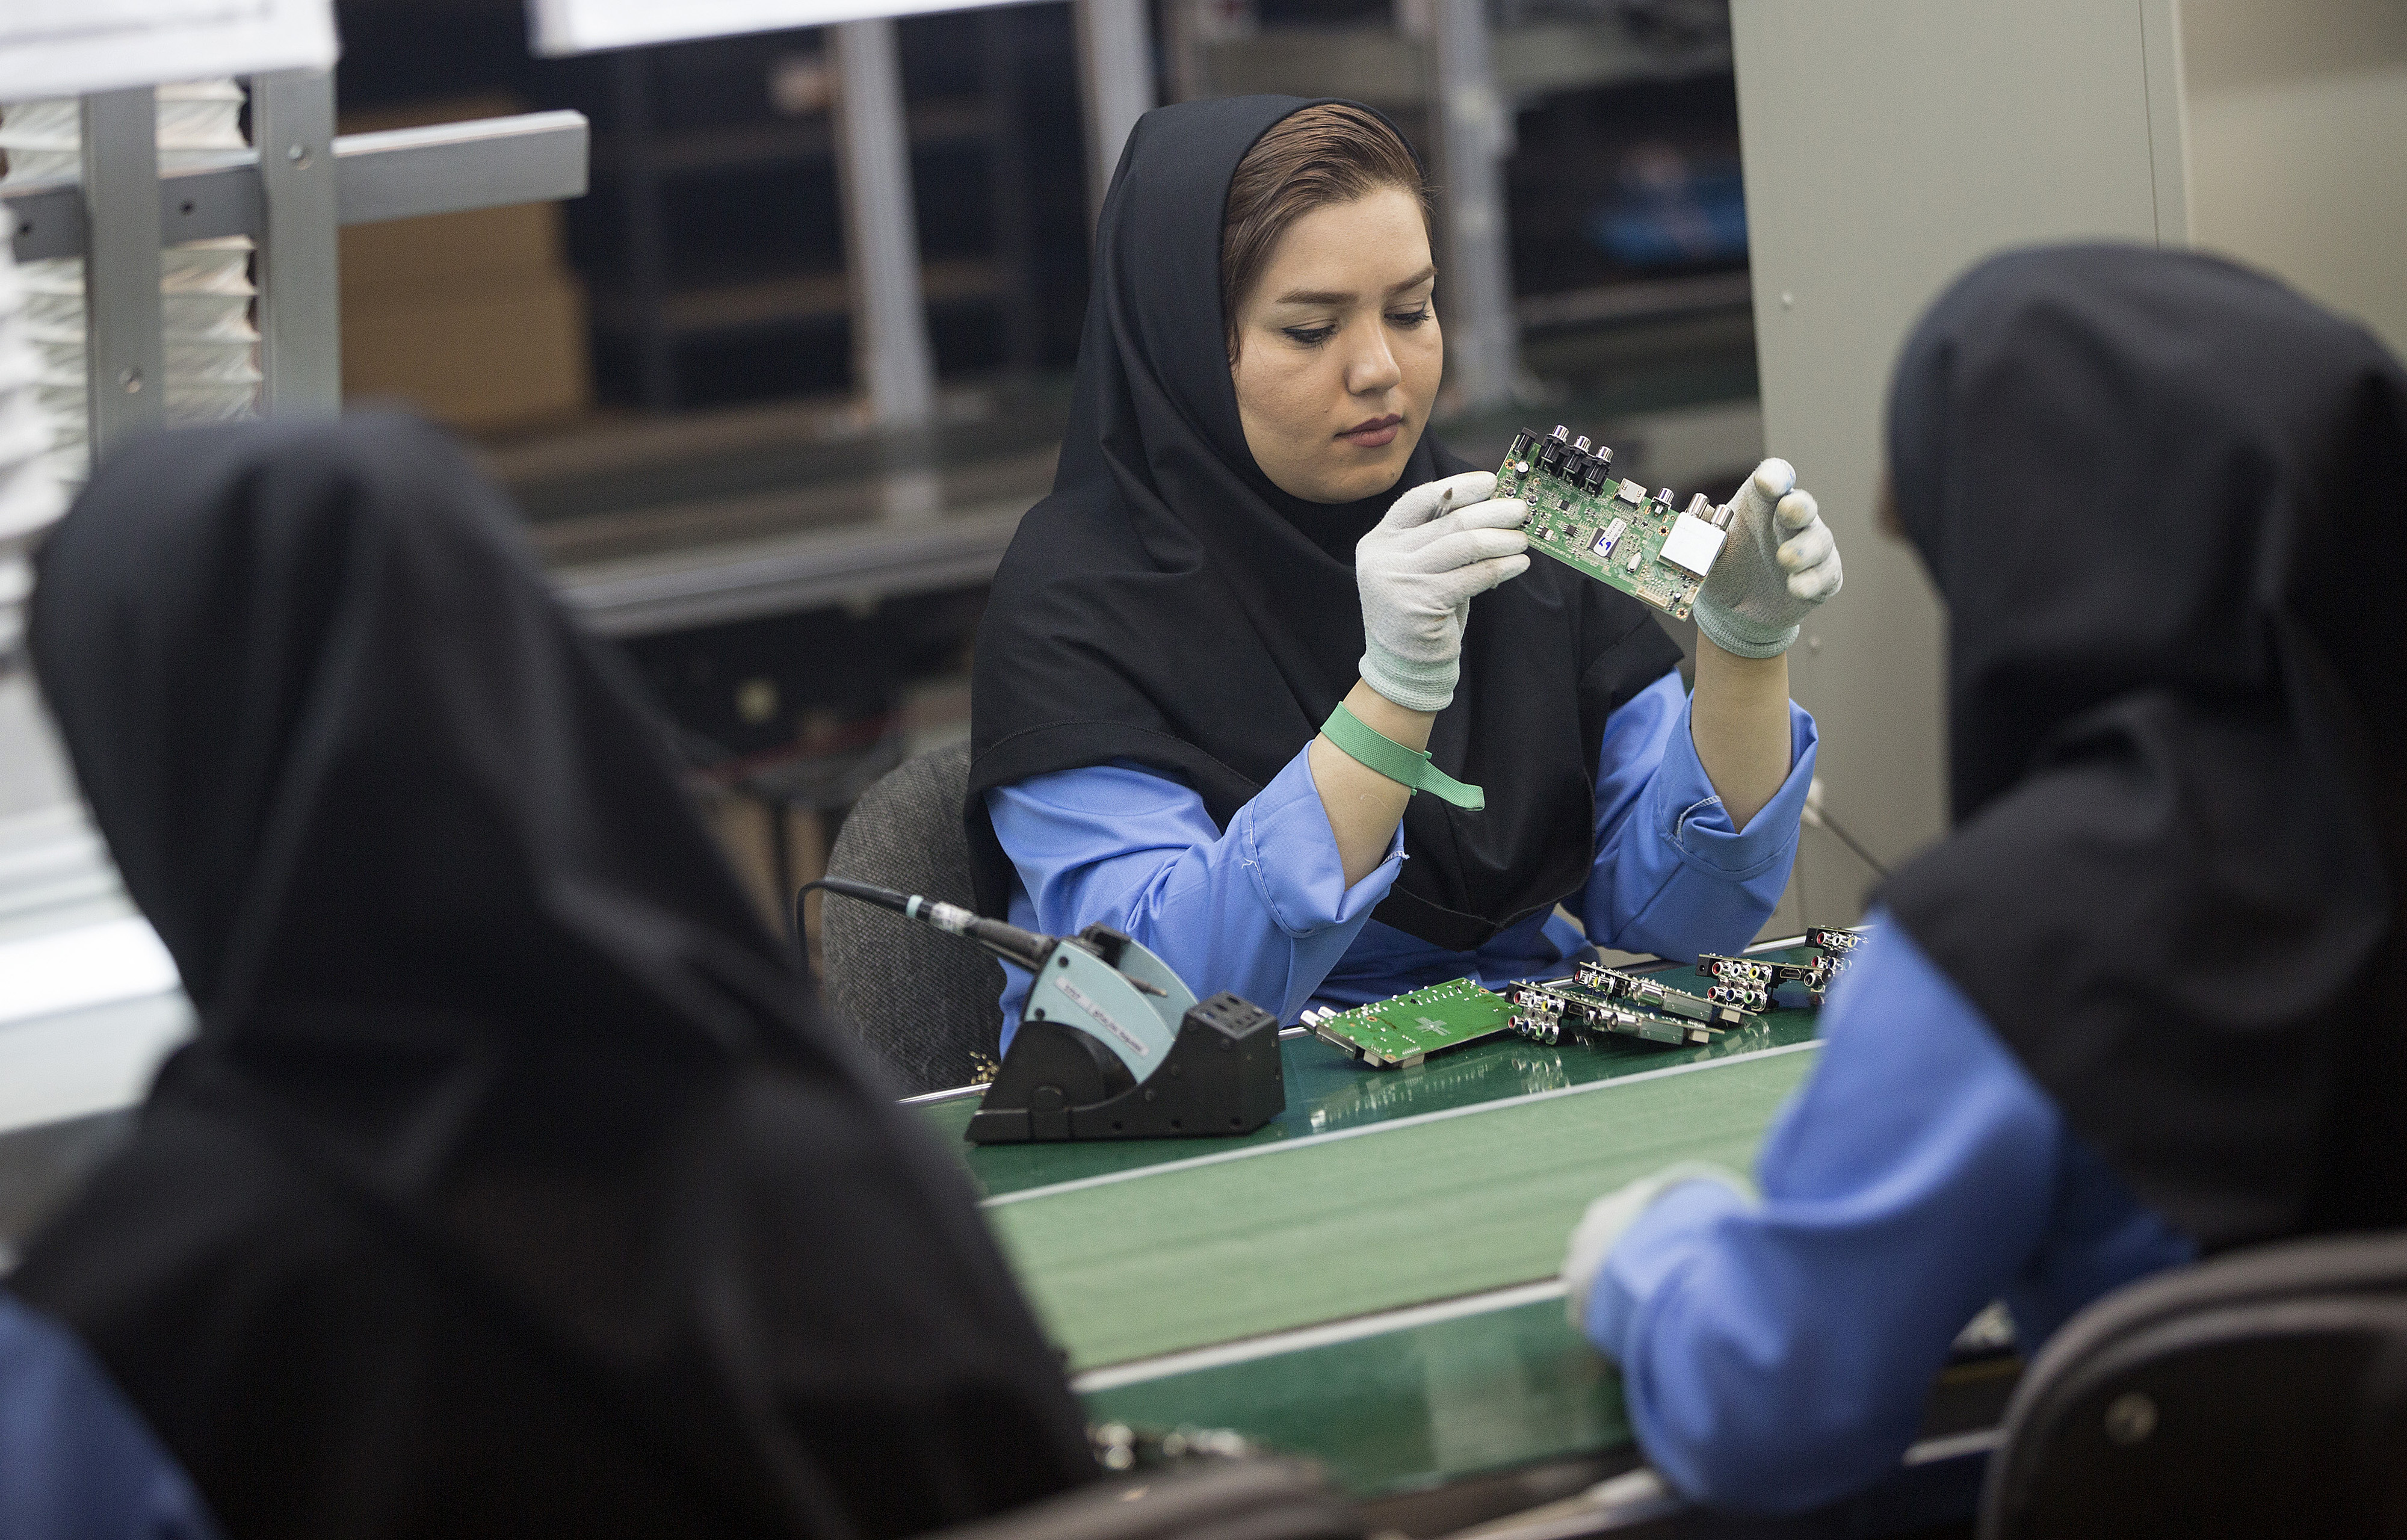 Female employees work on the assembly of electronic circuit boards at the Maadiran Group electronics distribution and manufacturing plant in Hashtgerd, Iran, on Tuesday, Sept. 1, 2015. (Simon Dawson—2015 Bloomberg Finance LP)